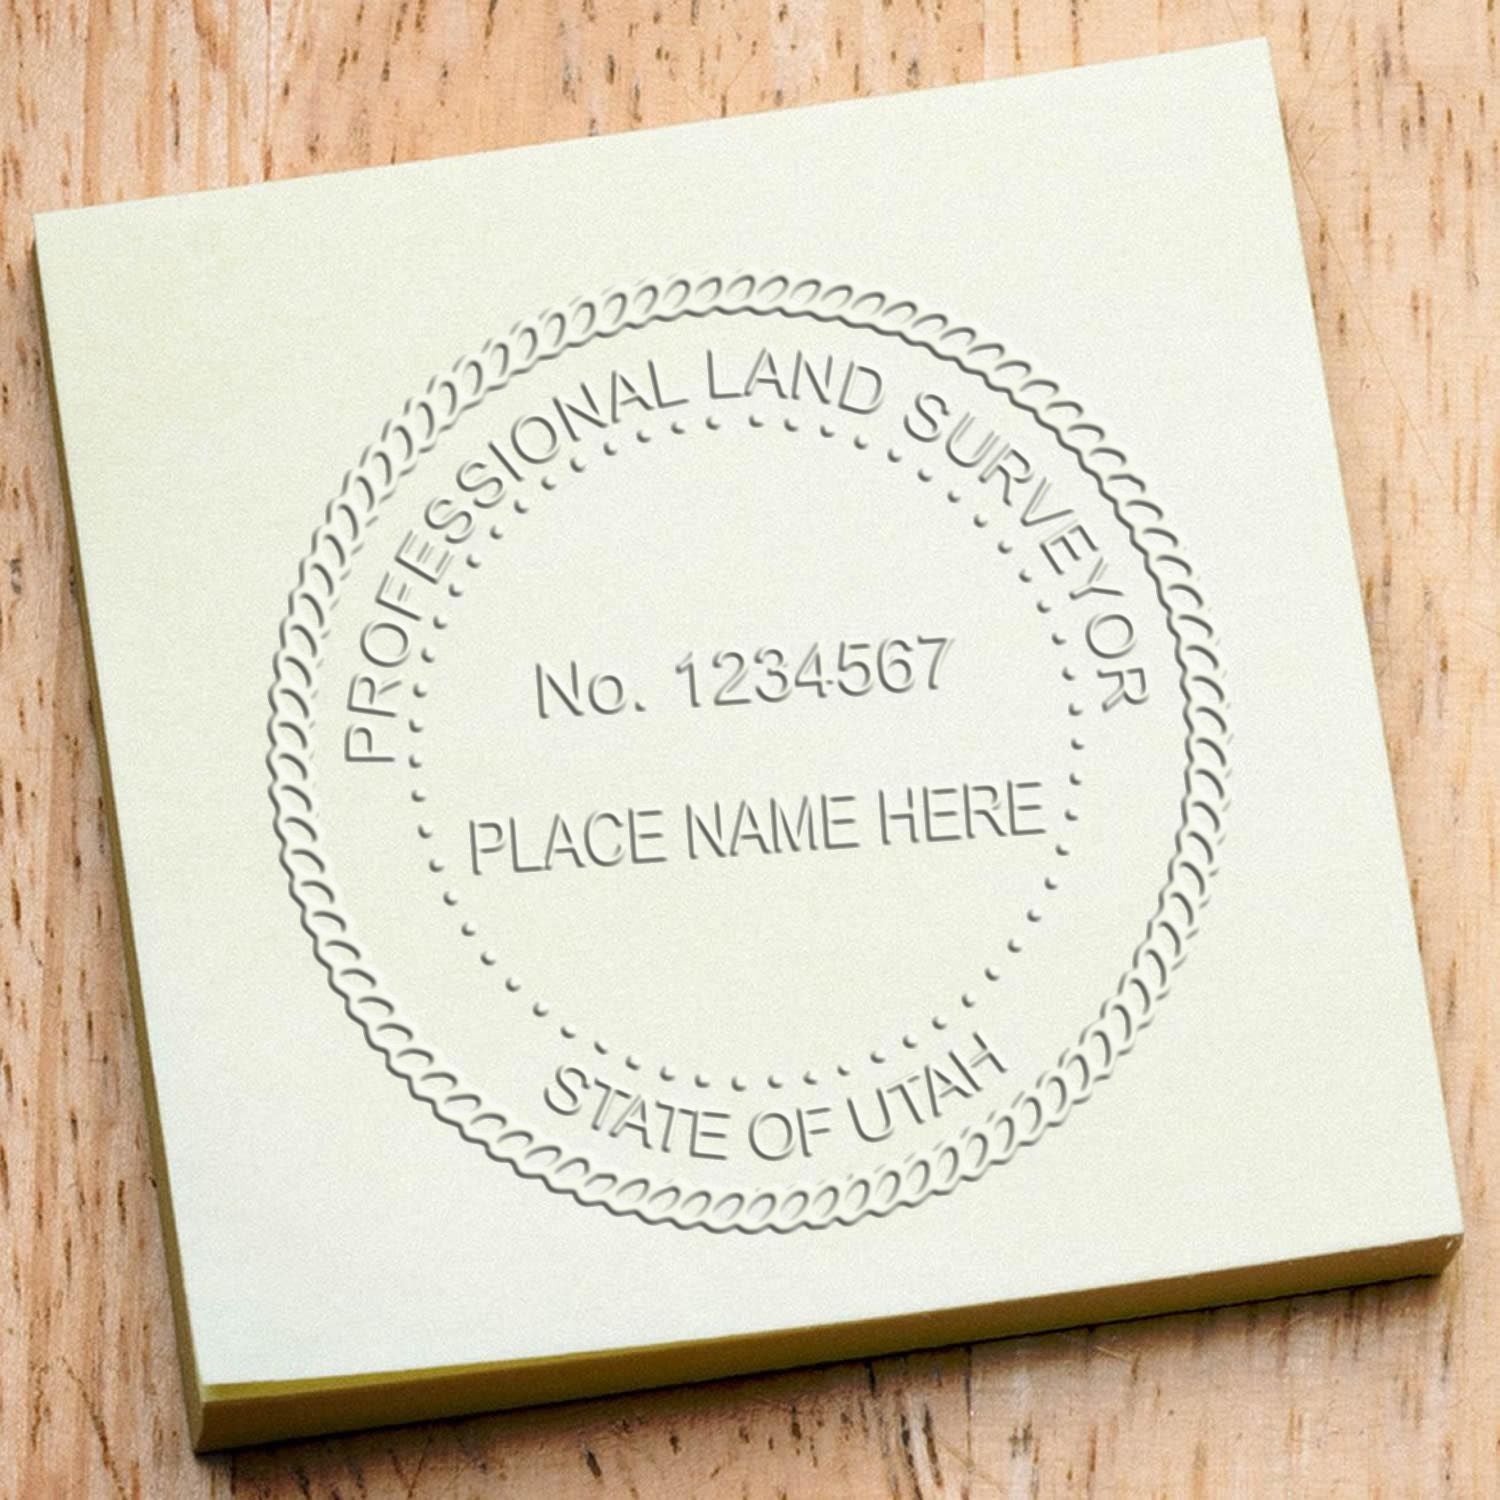 Navigating Utahs Rules: Land Surveyor Stamp and Seal Requirements Feature Image